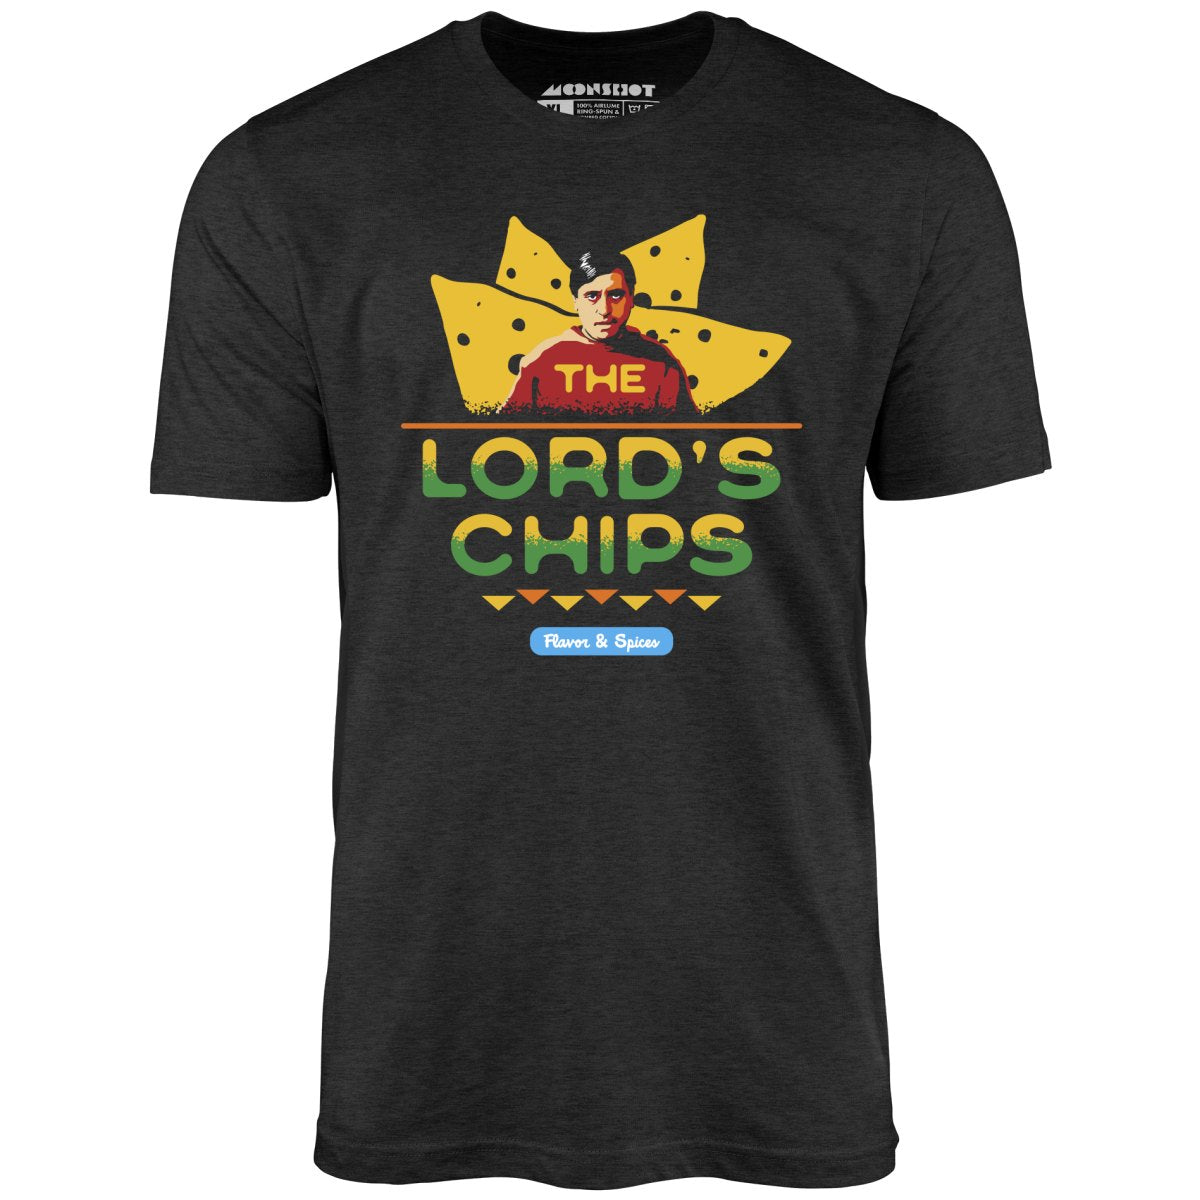 The Lord's Chips - Unisex T-Shirt